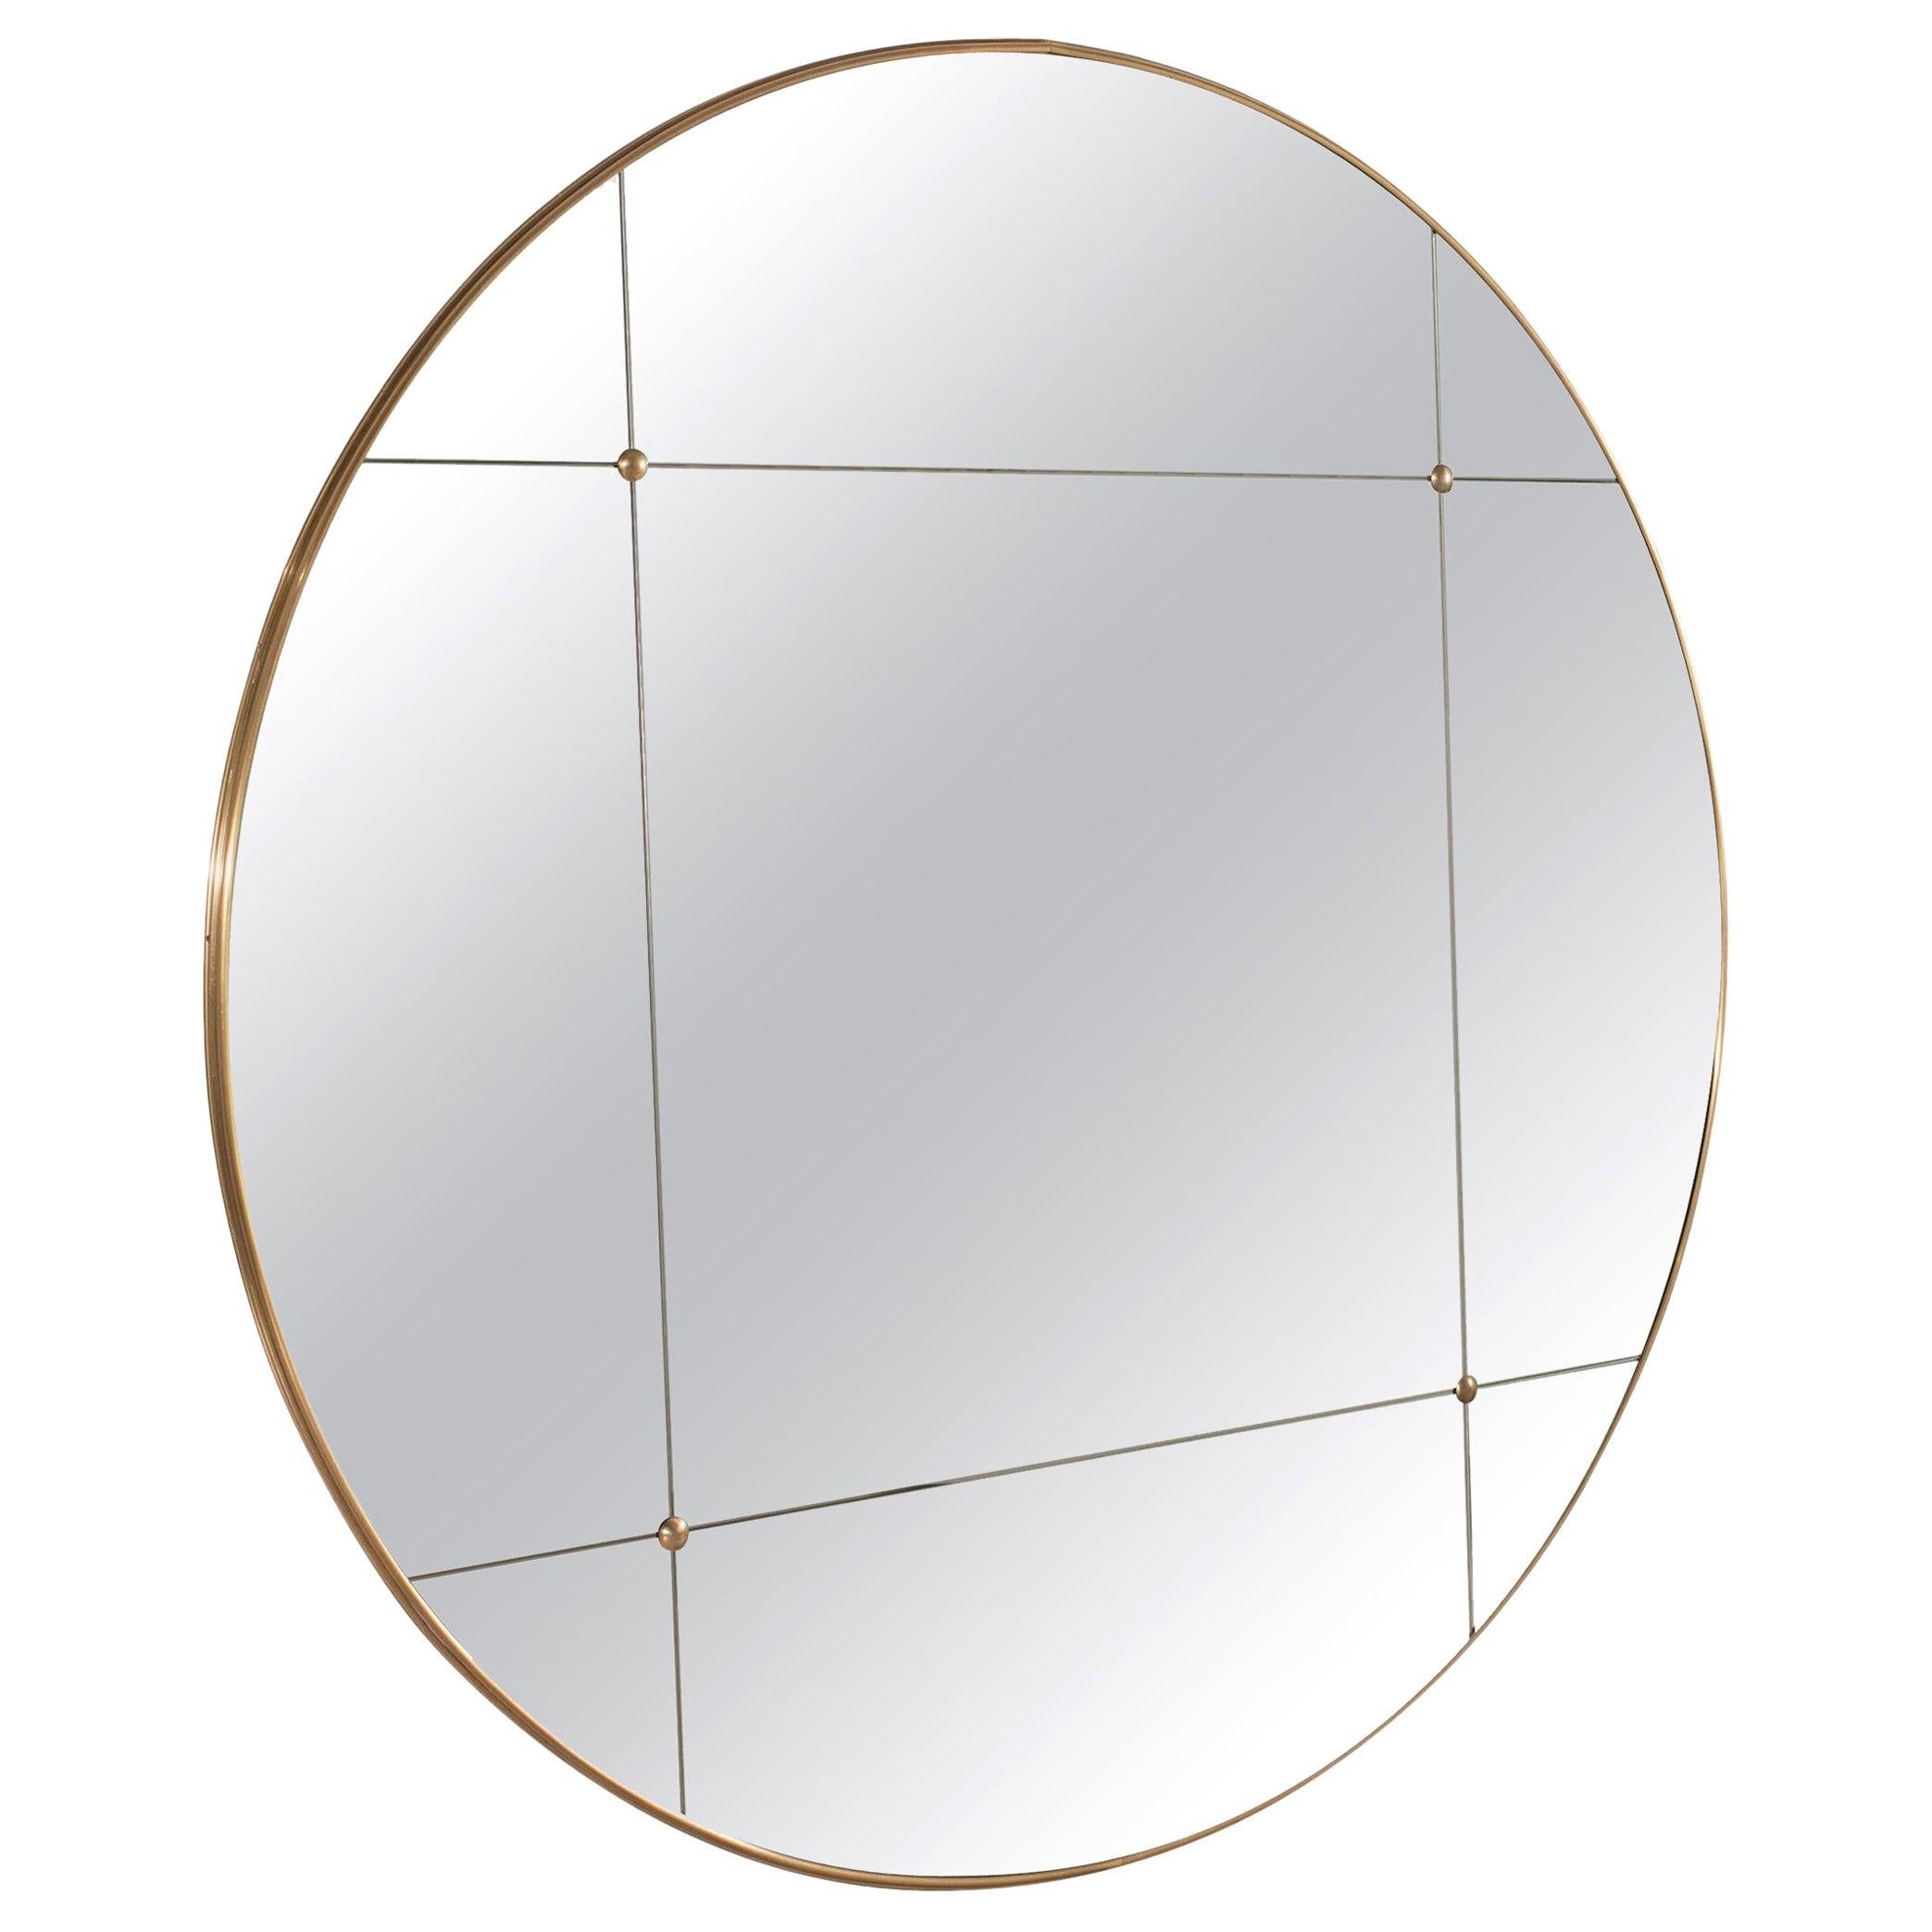 Rounded Brass Frame Window Pane Look Mirror Art Deco Style Customizable 150cm For Sale